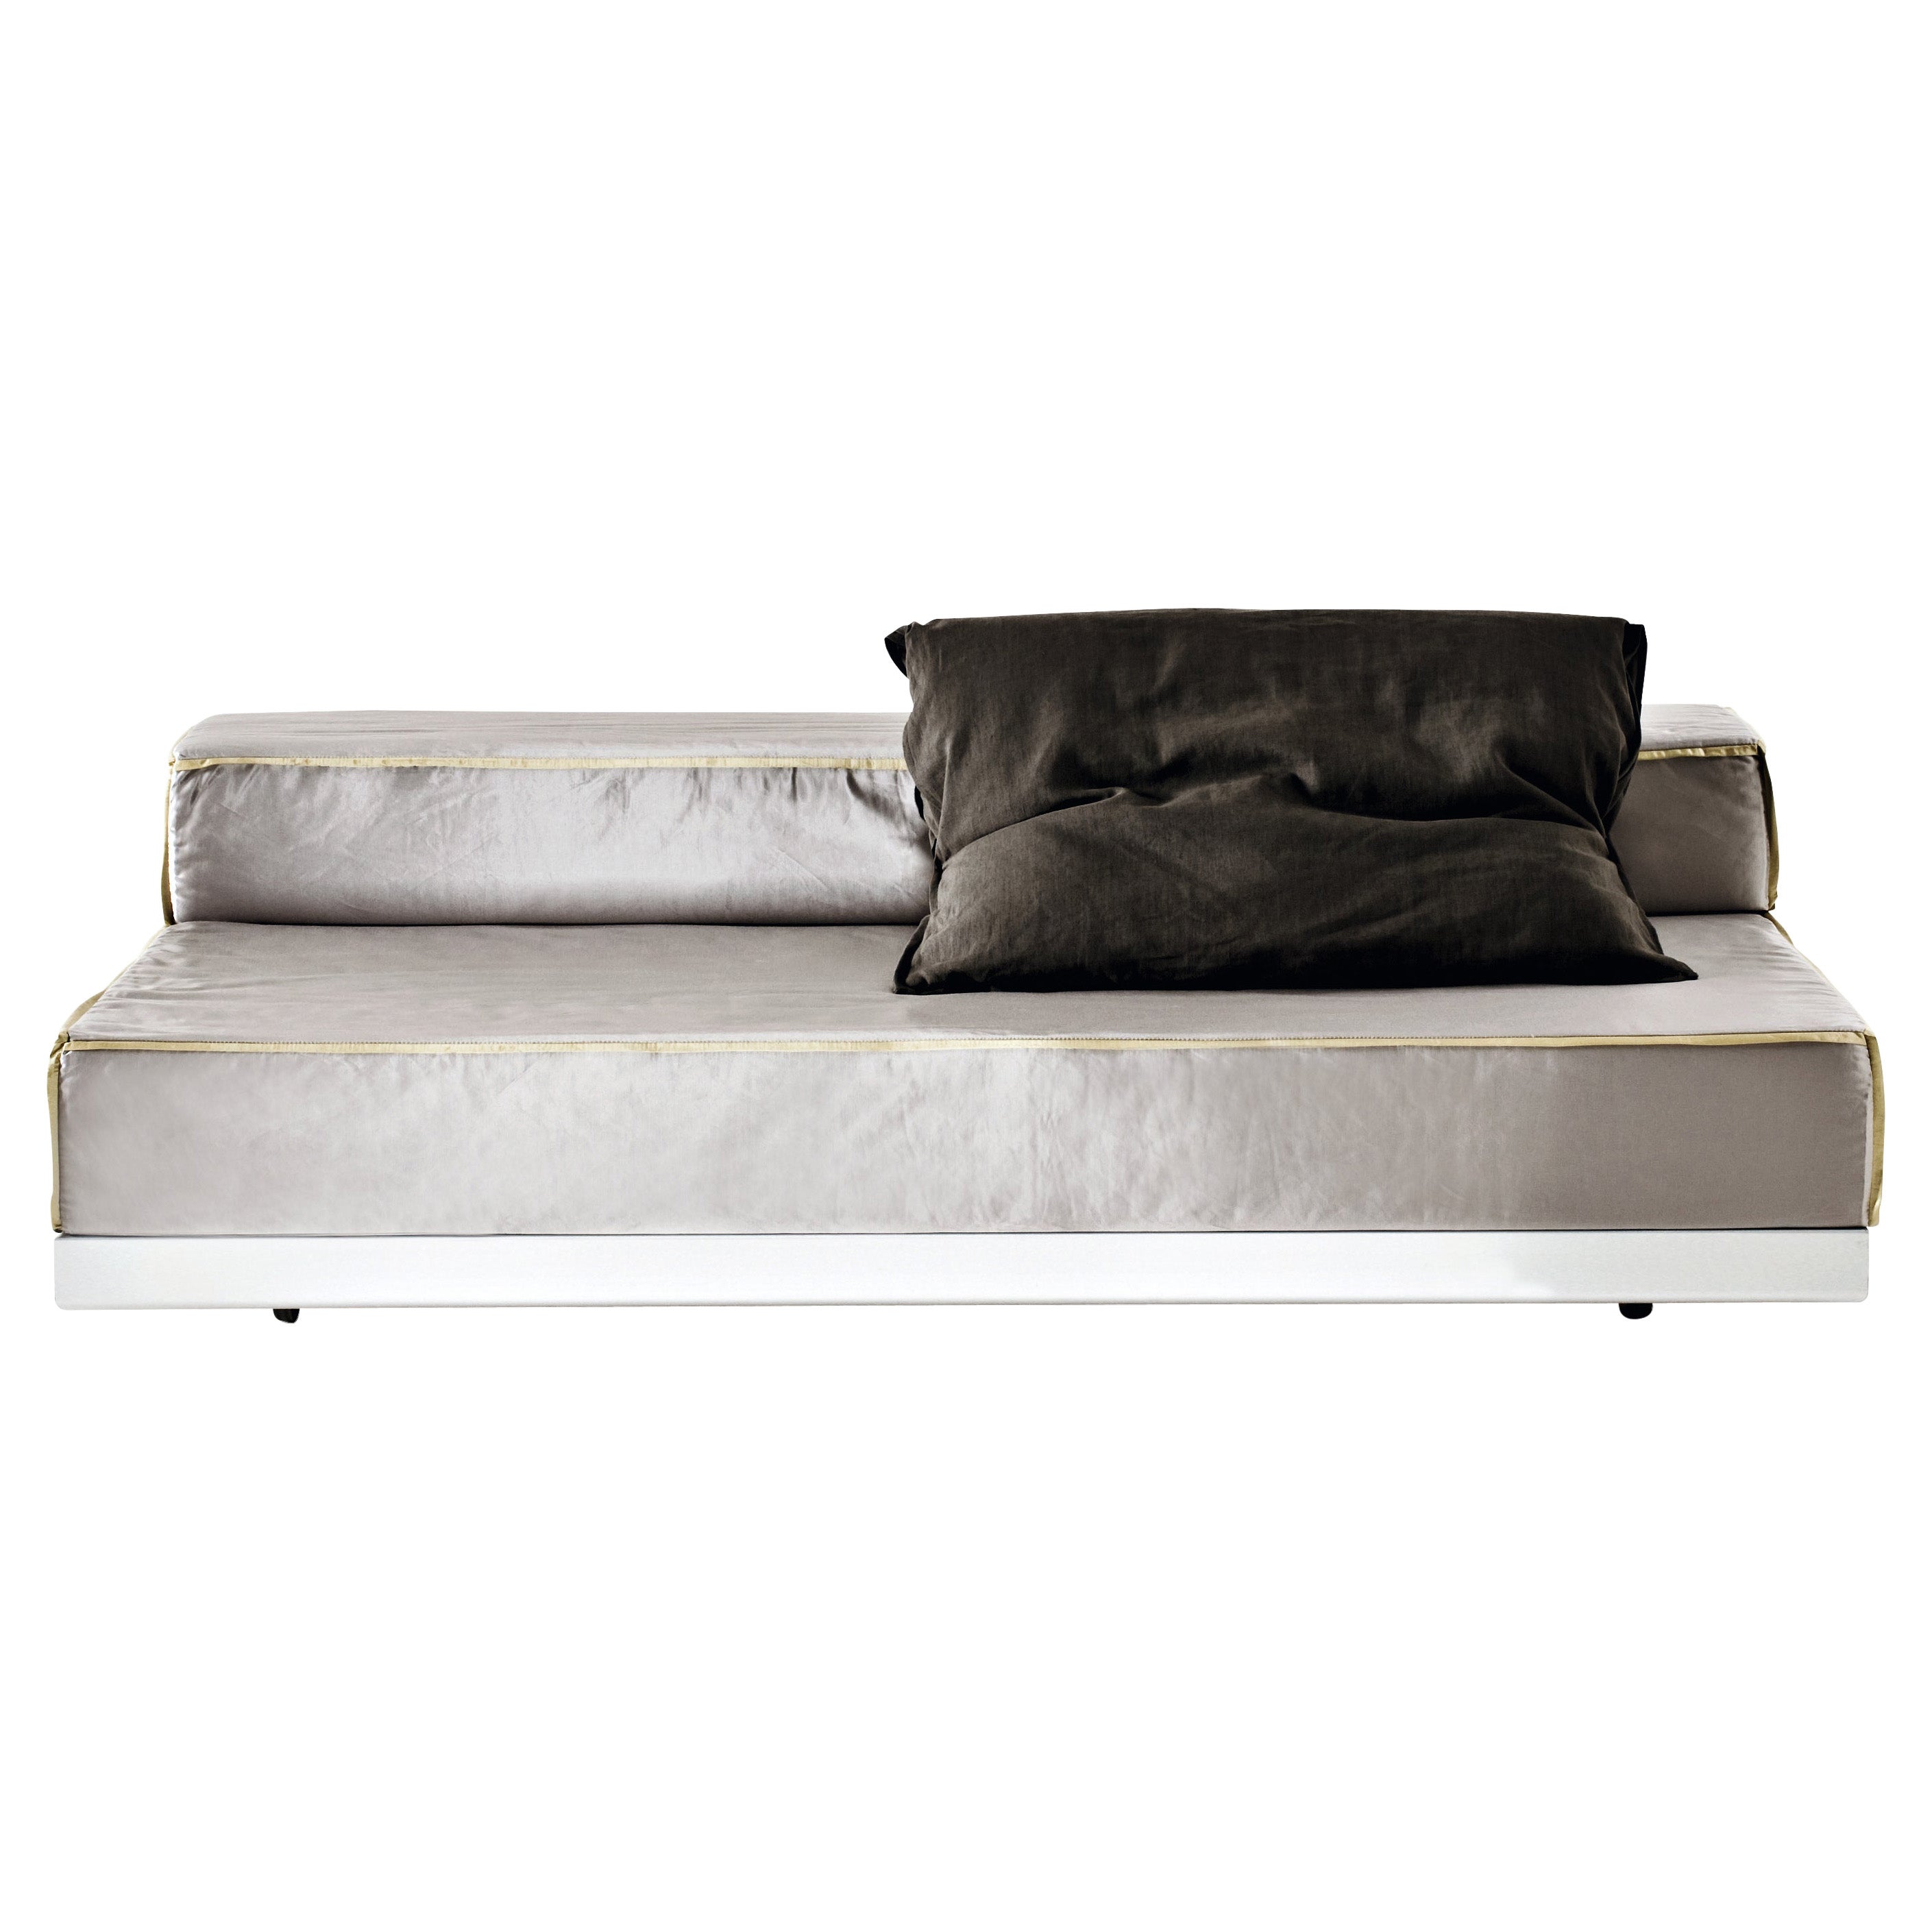 Bed & Breakfast Sofa Bed in Lario Light Grey Upholstery by Giuseppe Viganò For Sale